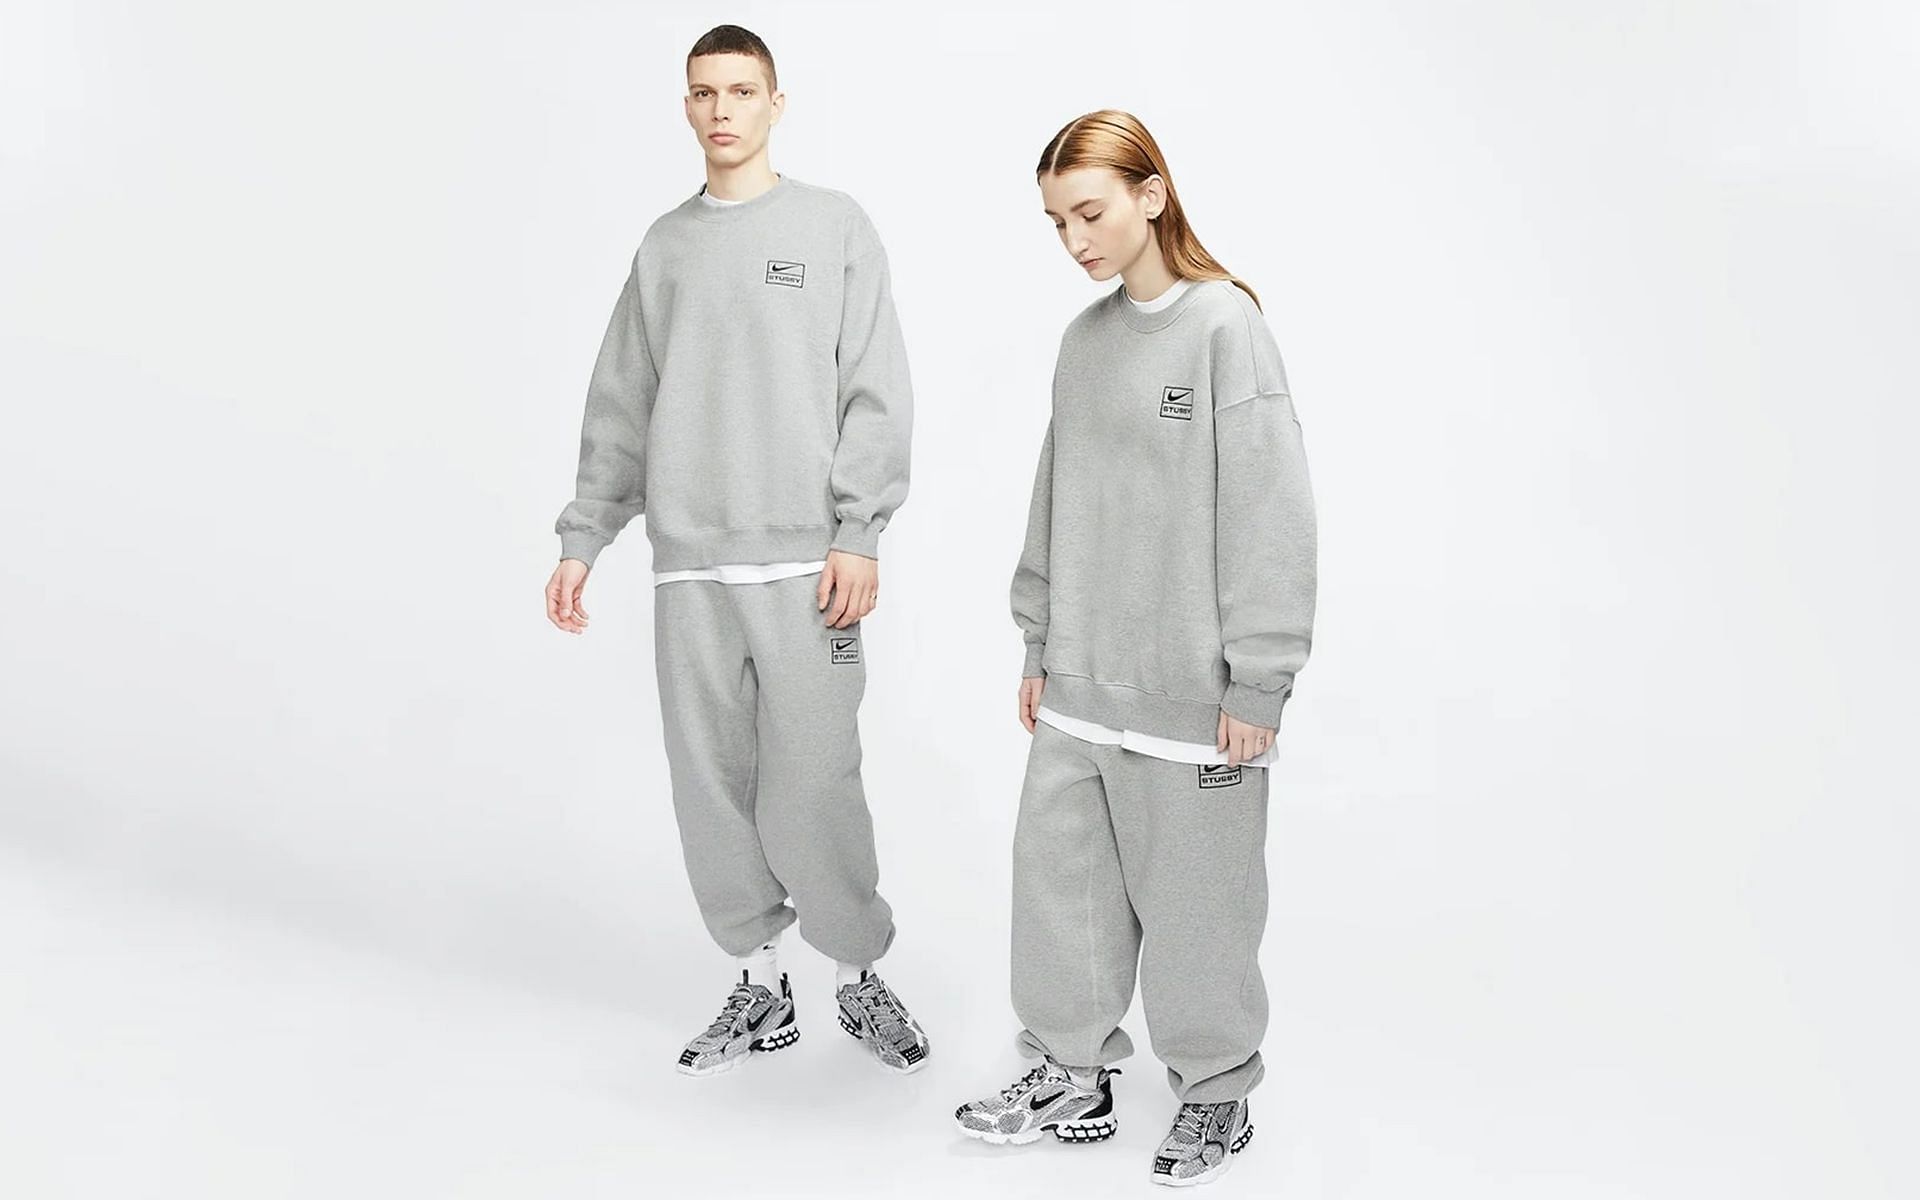 Stüssy x Nike apparel collection: Where to buy, release date, and more ...